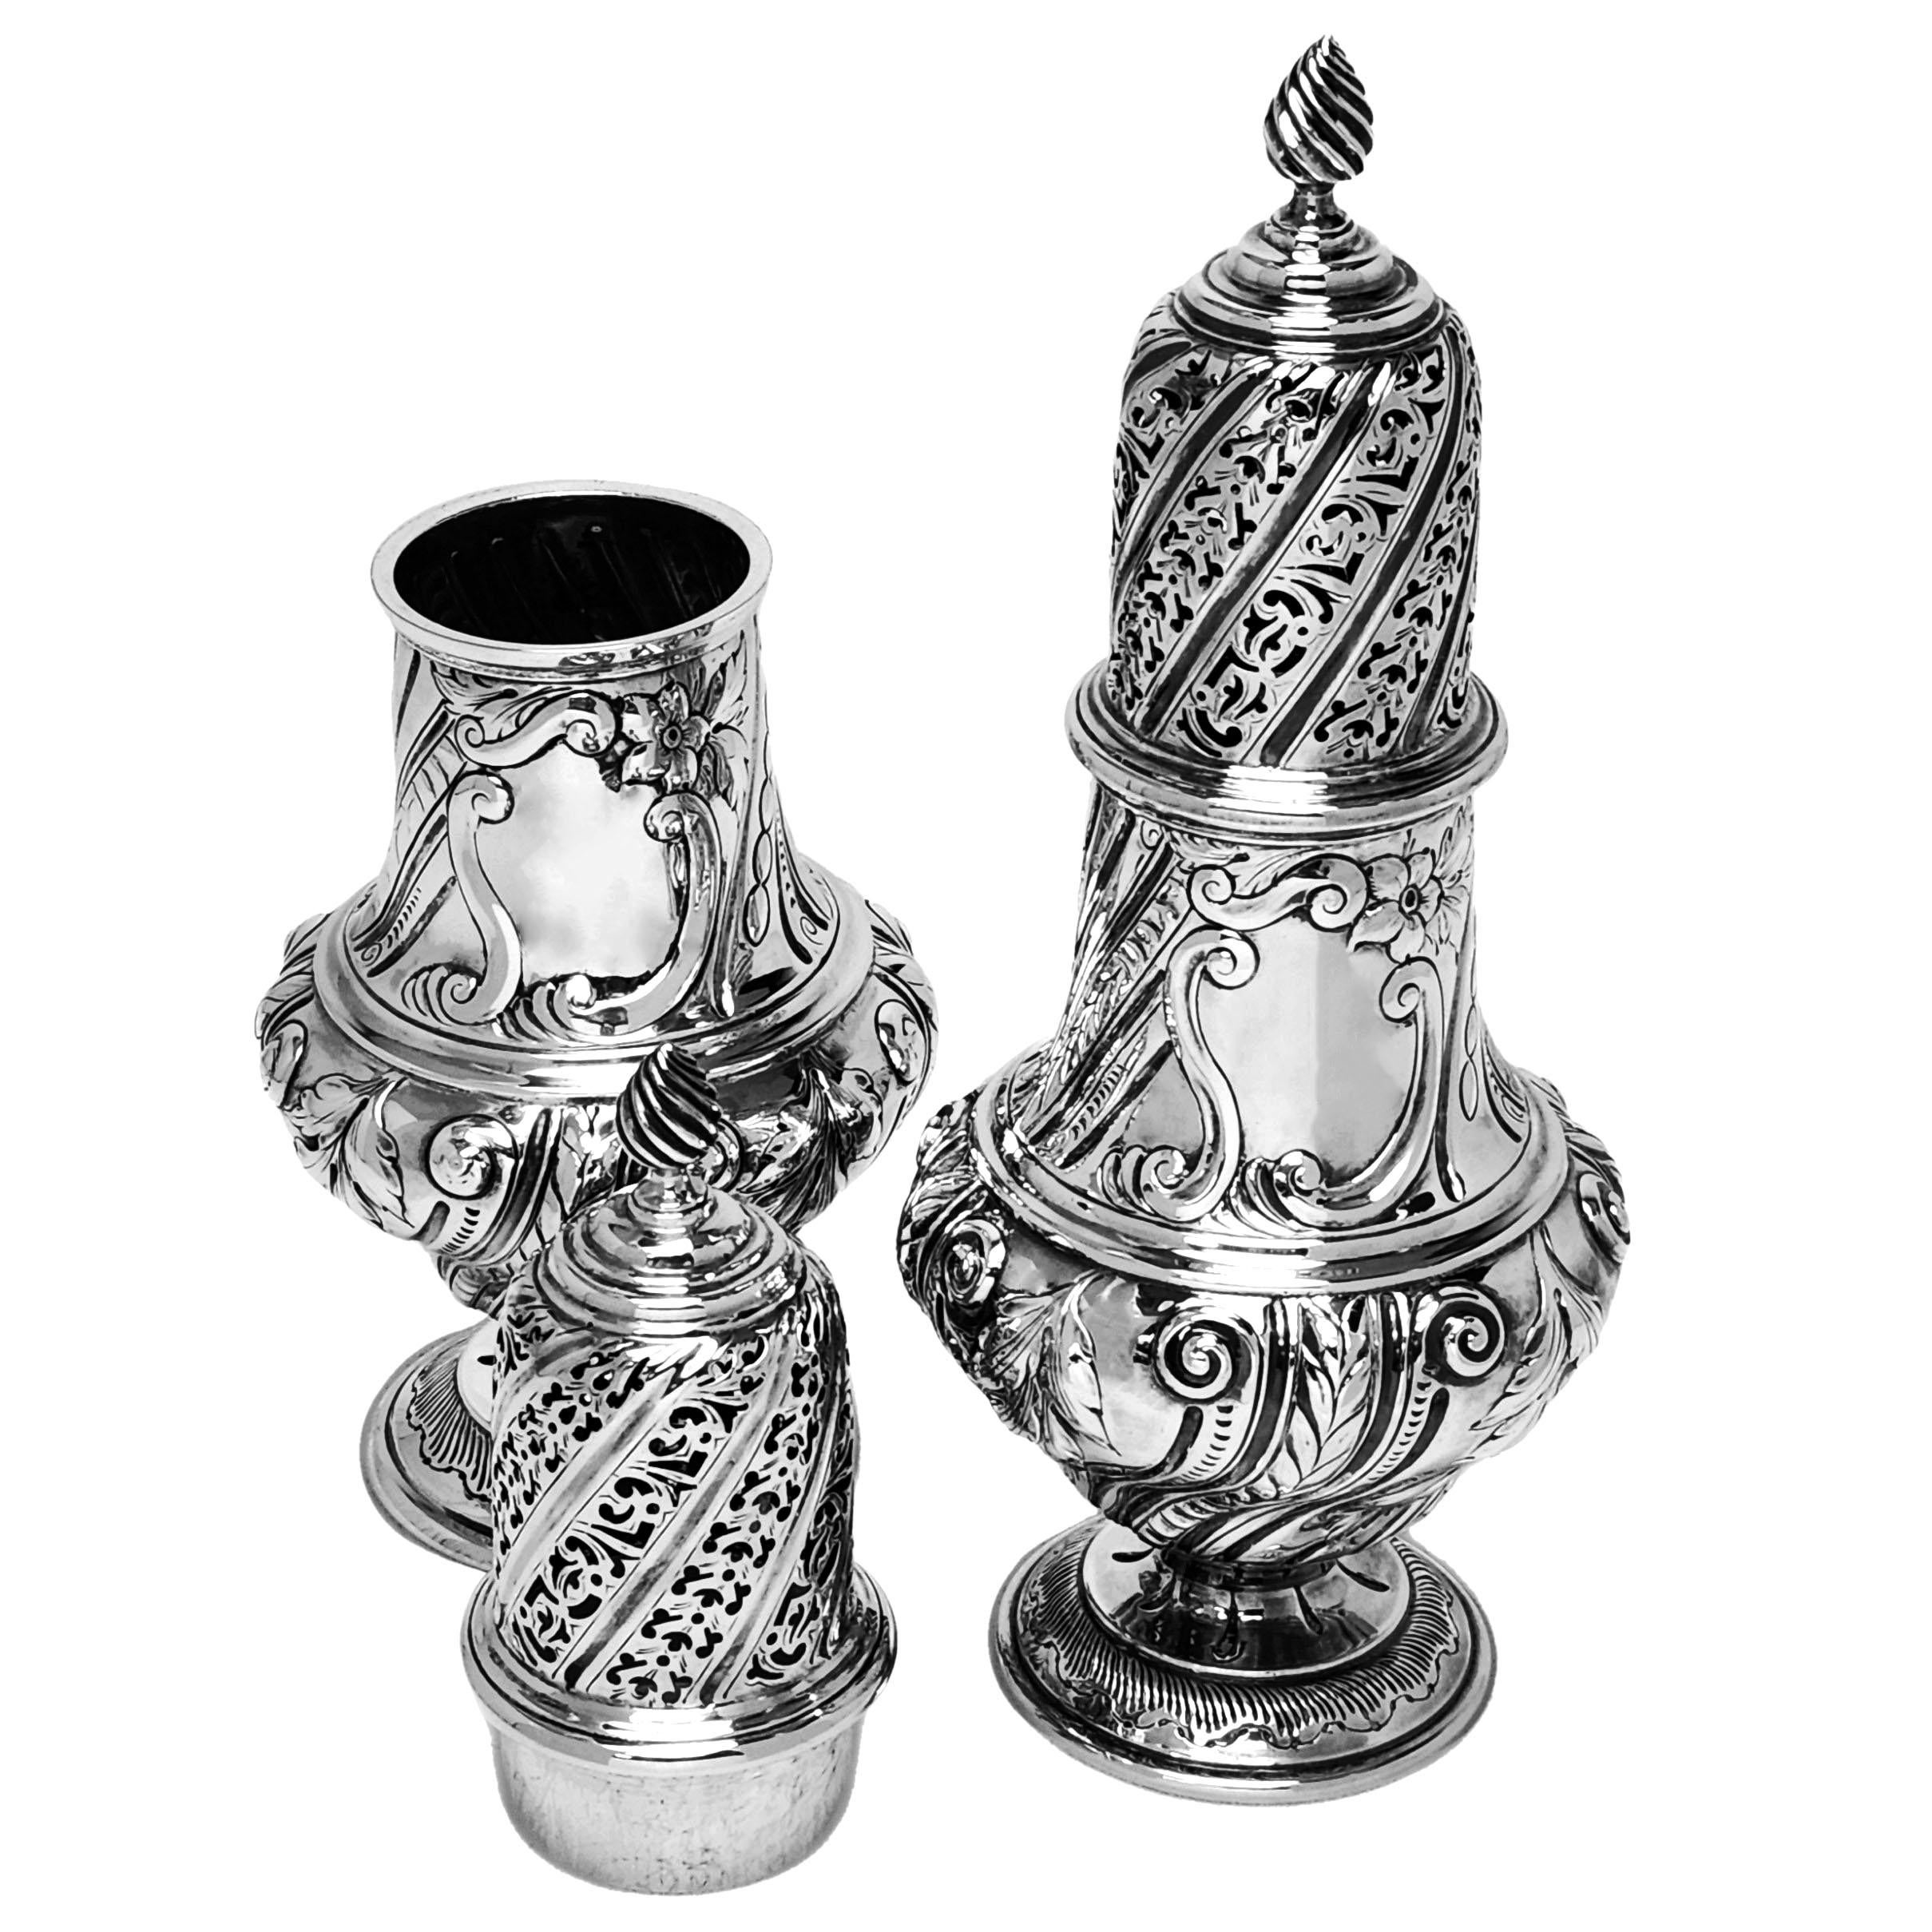 English Pair Large Antique Victorian Silver Casters / Shakers 1886 / 87 Sugar For Sale